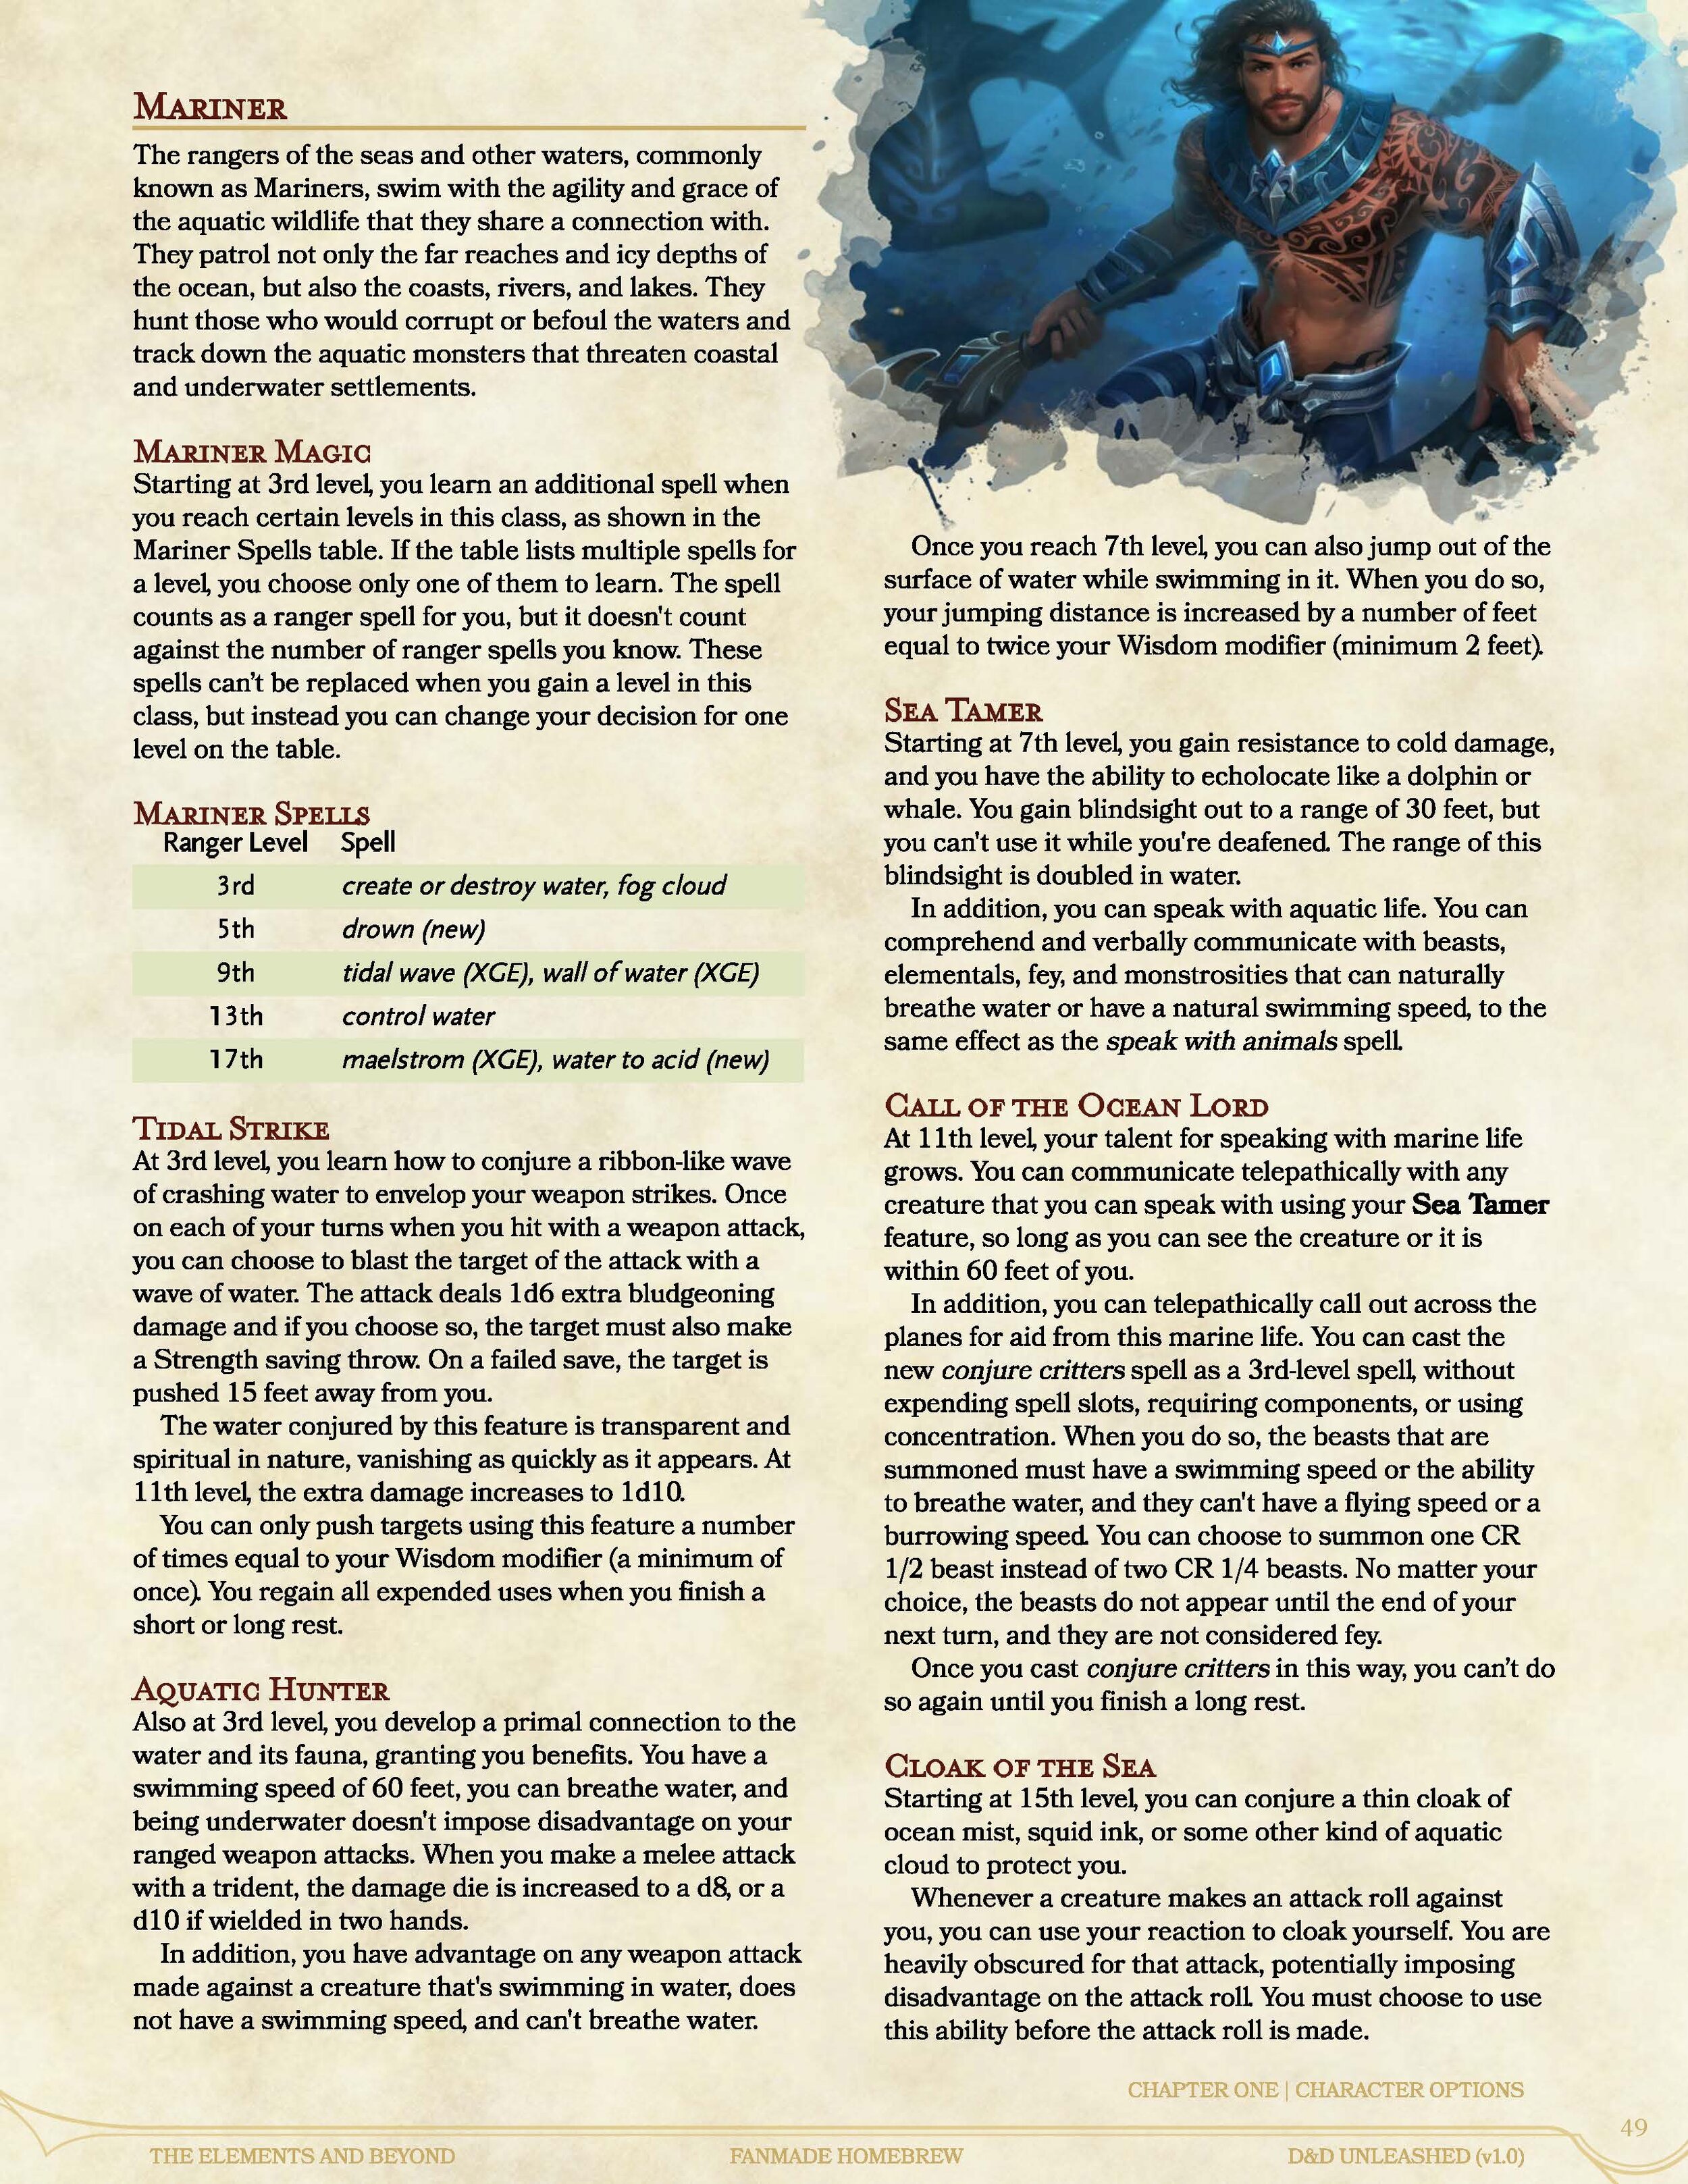 D&D Unleashed Compendium -- The Elements and Beyond (v1p0)_Page_049.jpg